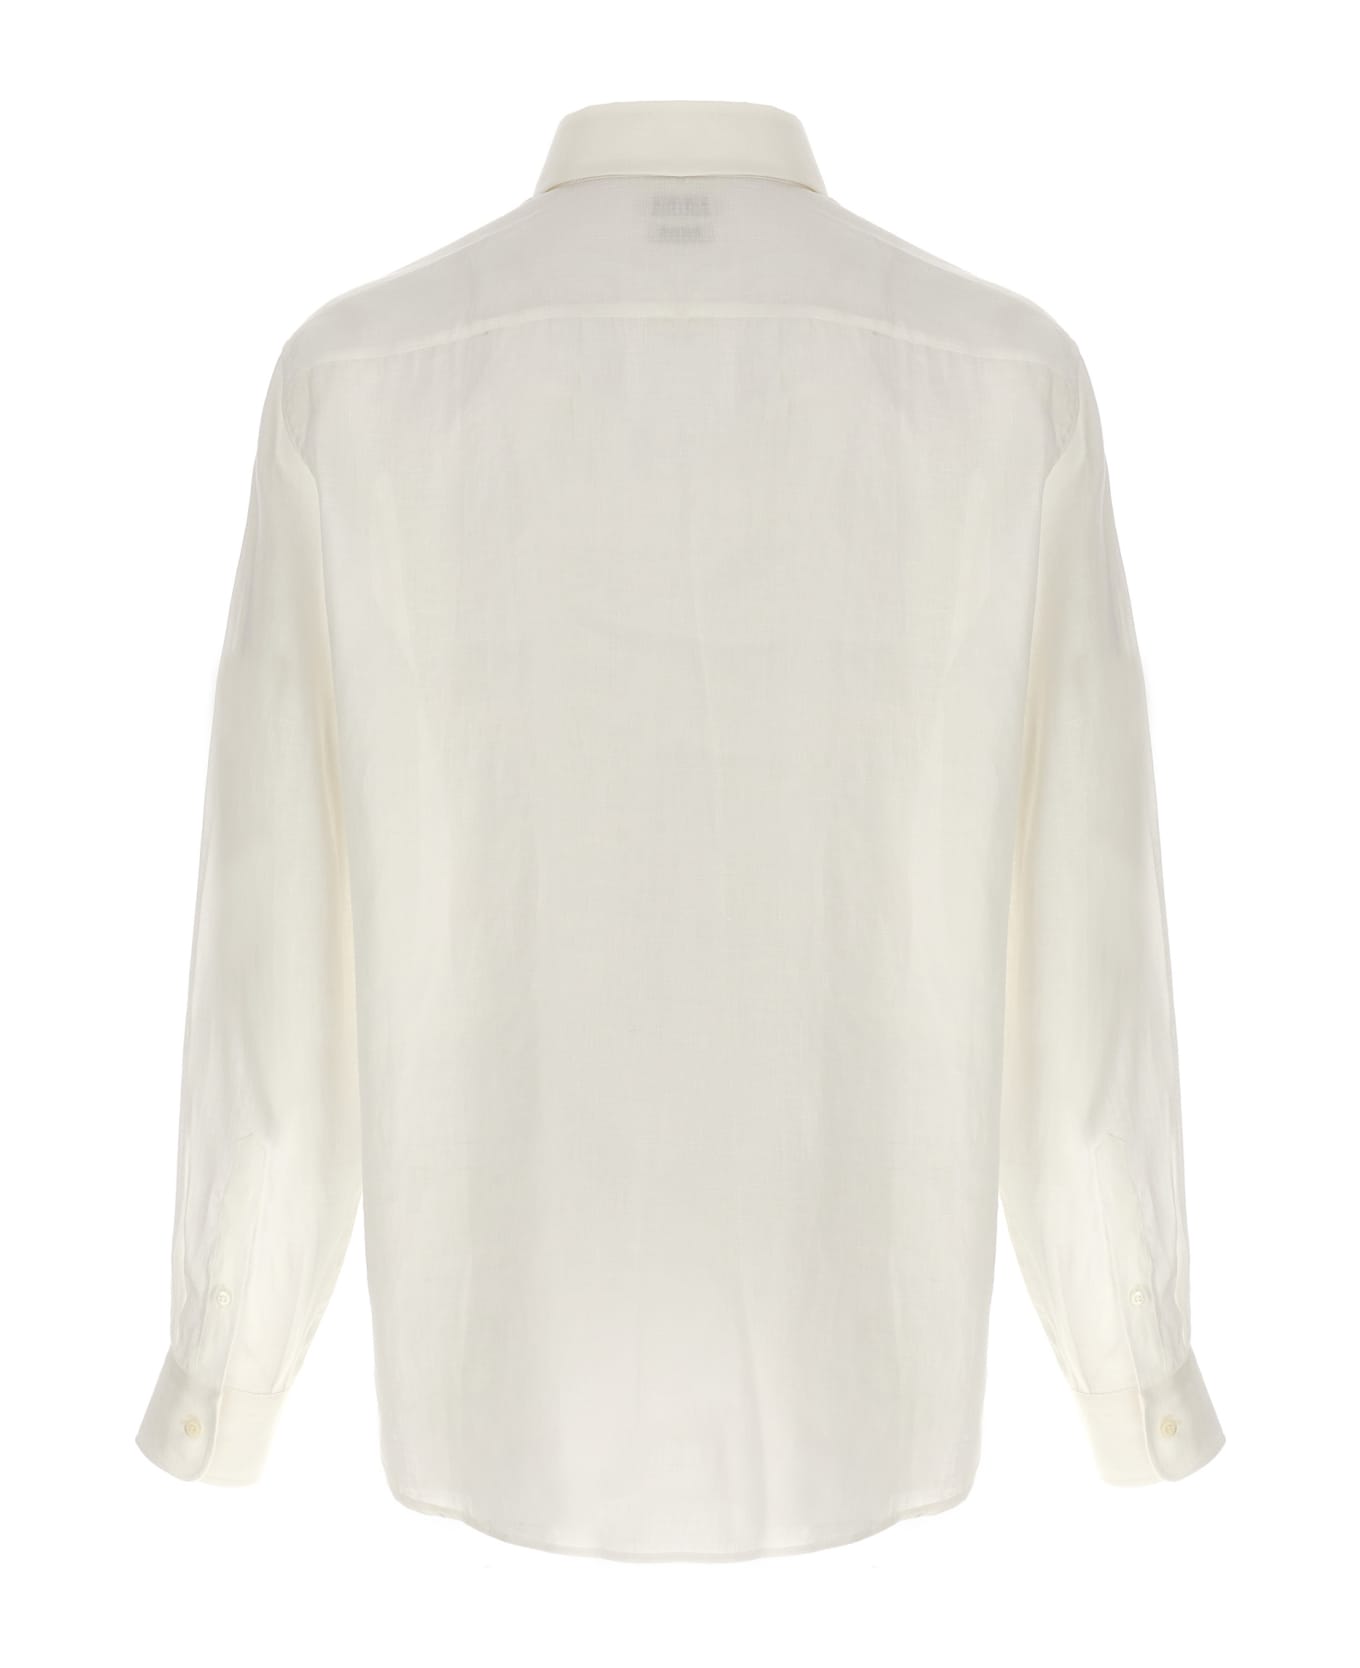 Brunello Cucinelli Long-sleeved Buttoned-up Shirt - White